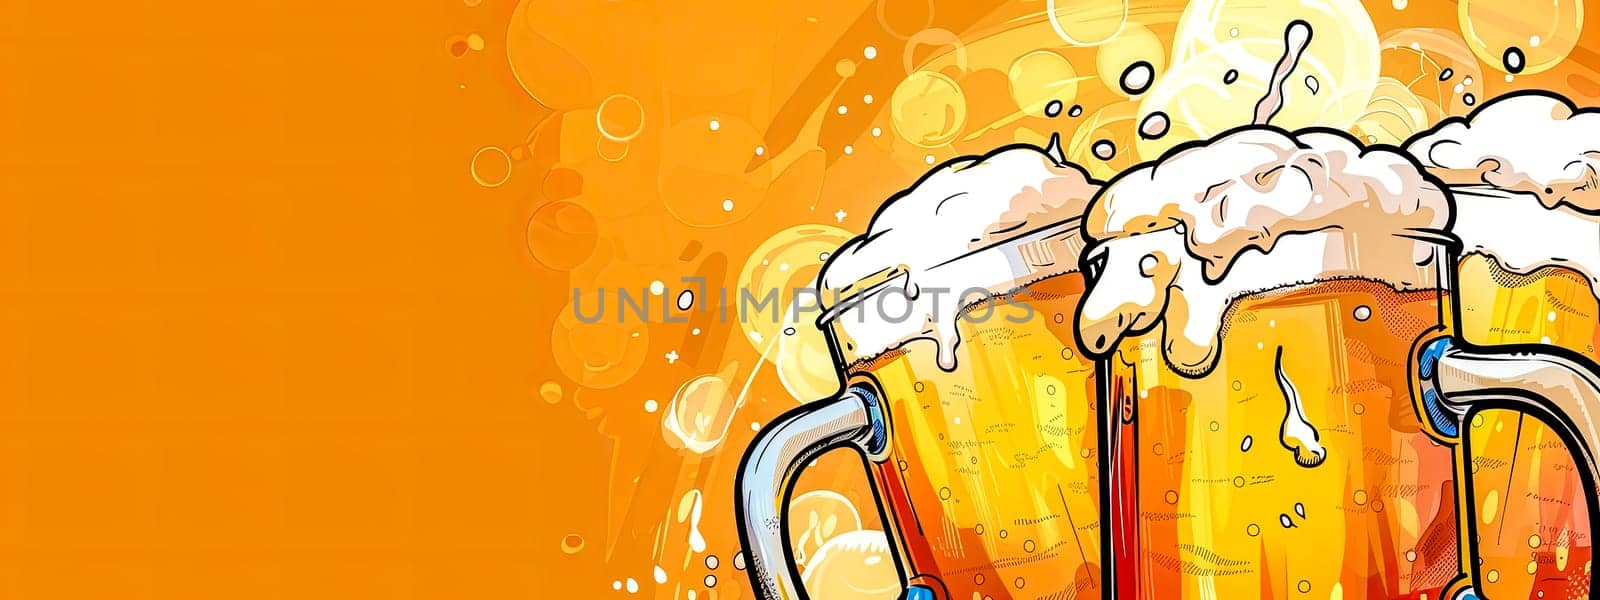 Cheers to friendship: frothy beer toast illustration by Edophoto